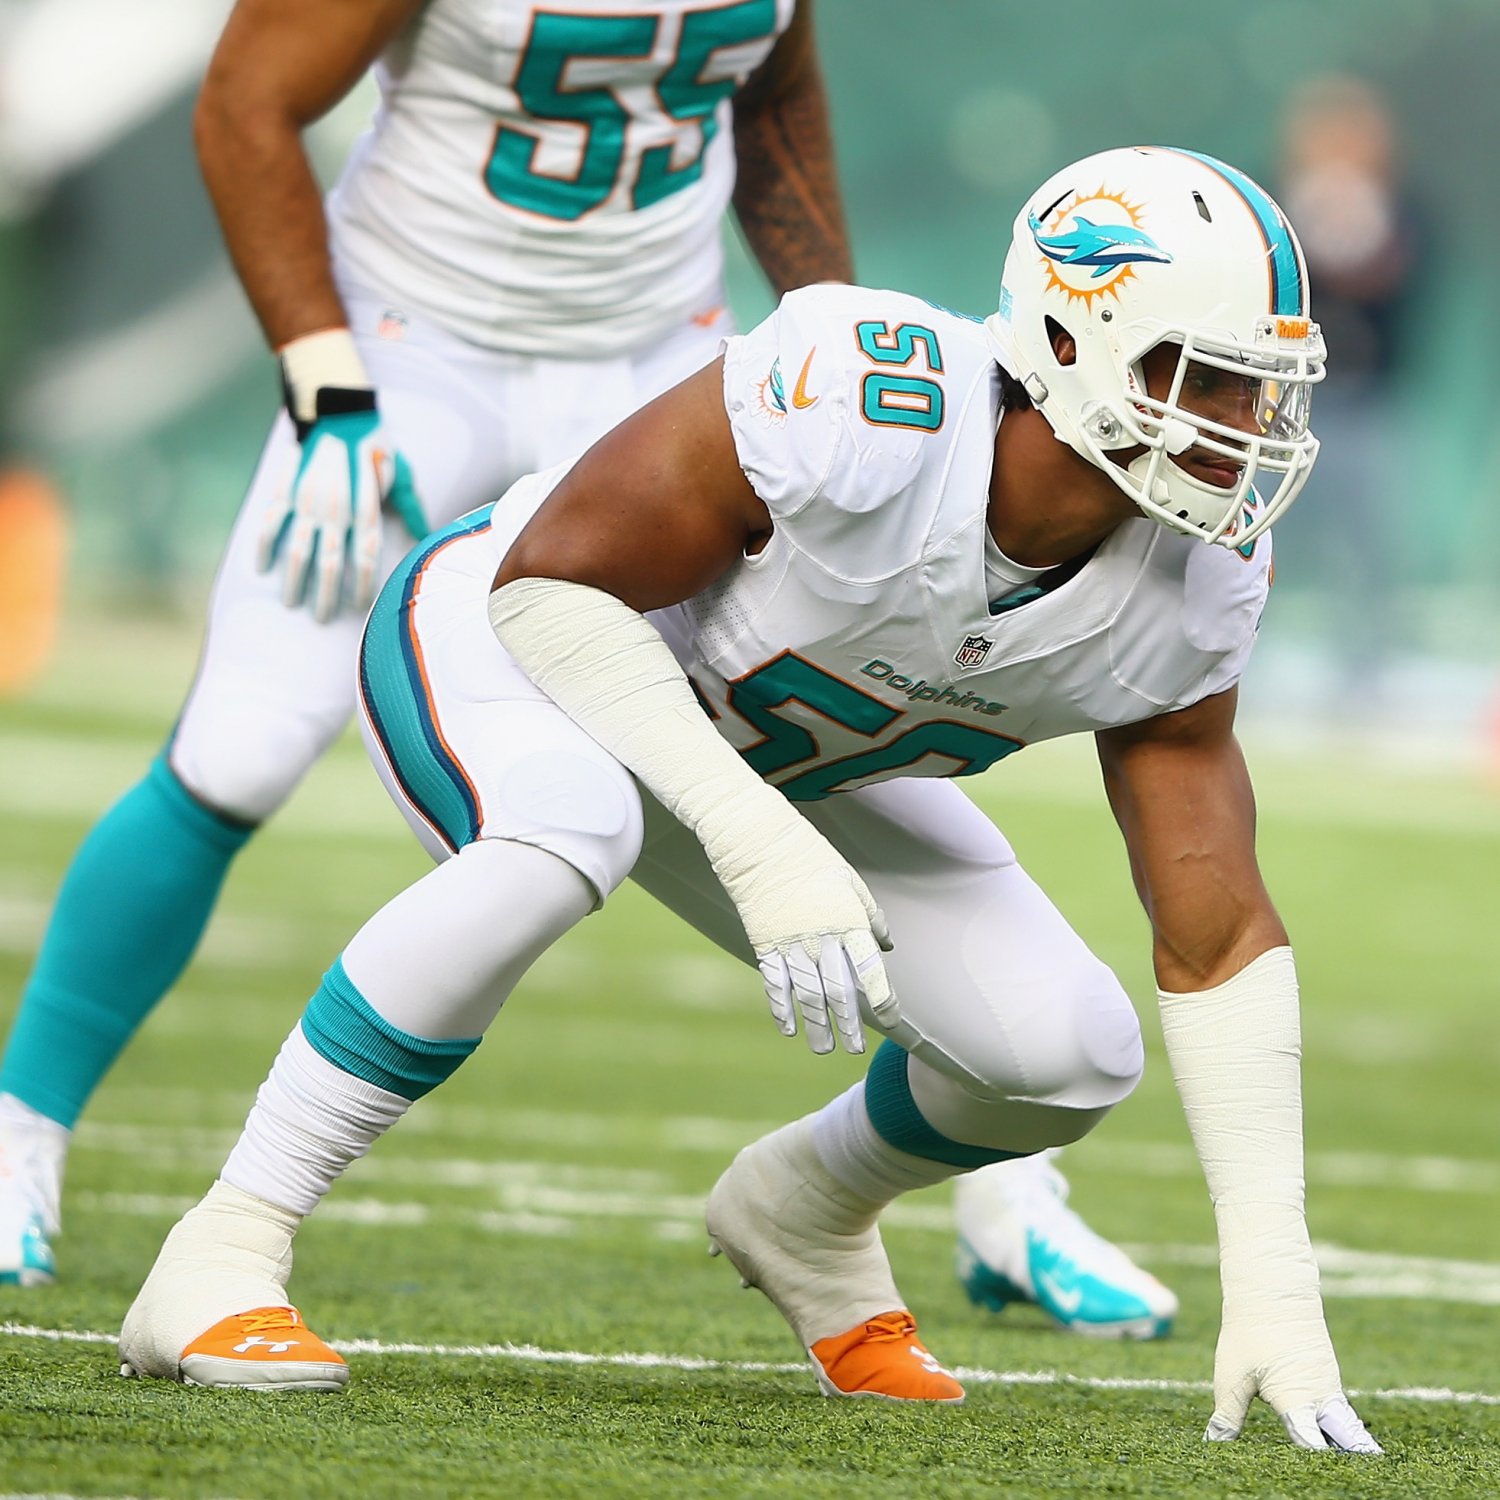 http://img.bleacherreport.net/img/images/photos/002/645/547/hi-res-453329721-olivier-vernon-of-the-miami-dolphins-in-action-against_crop_exact.jpg?w=1500&h=1500&q=85